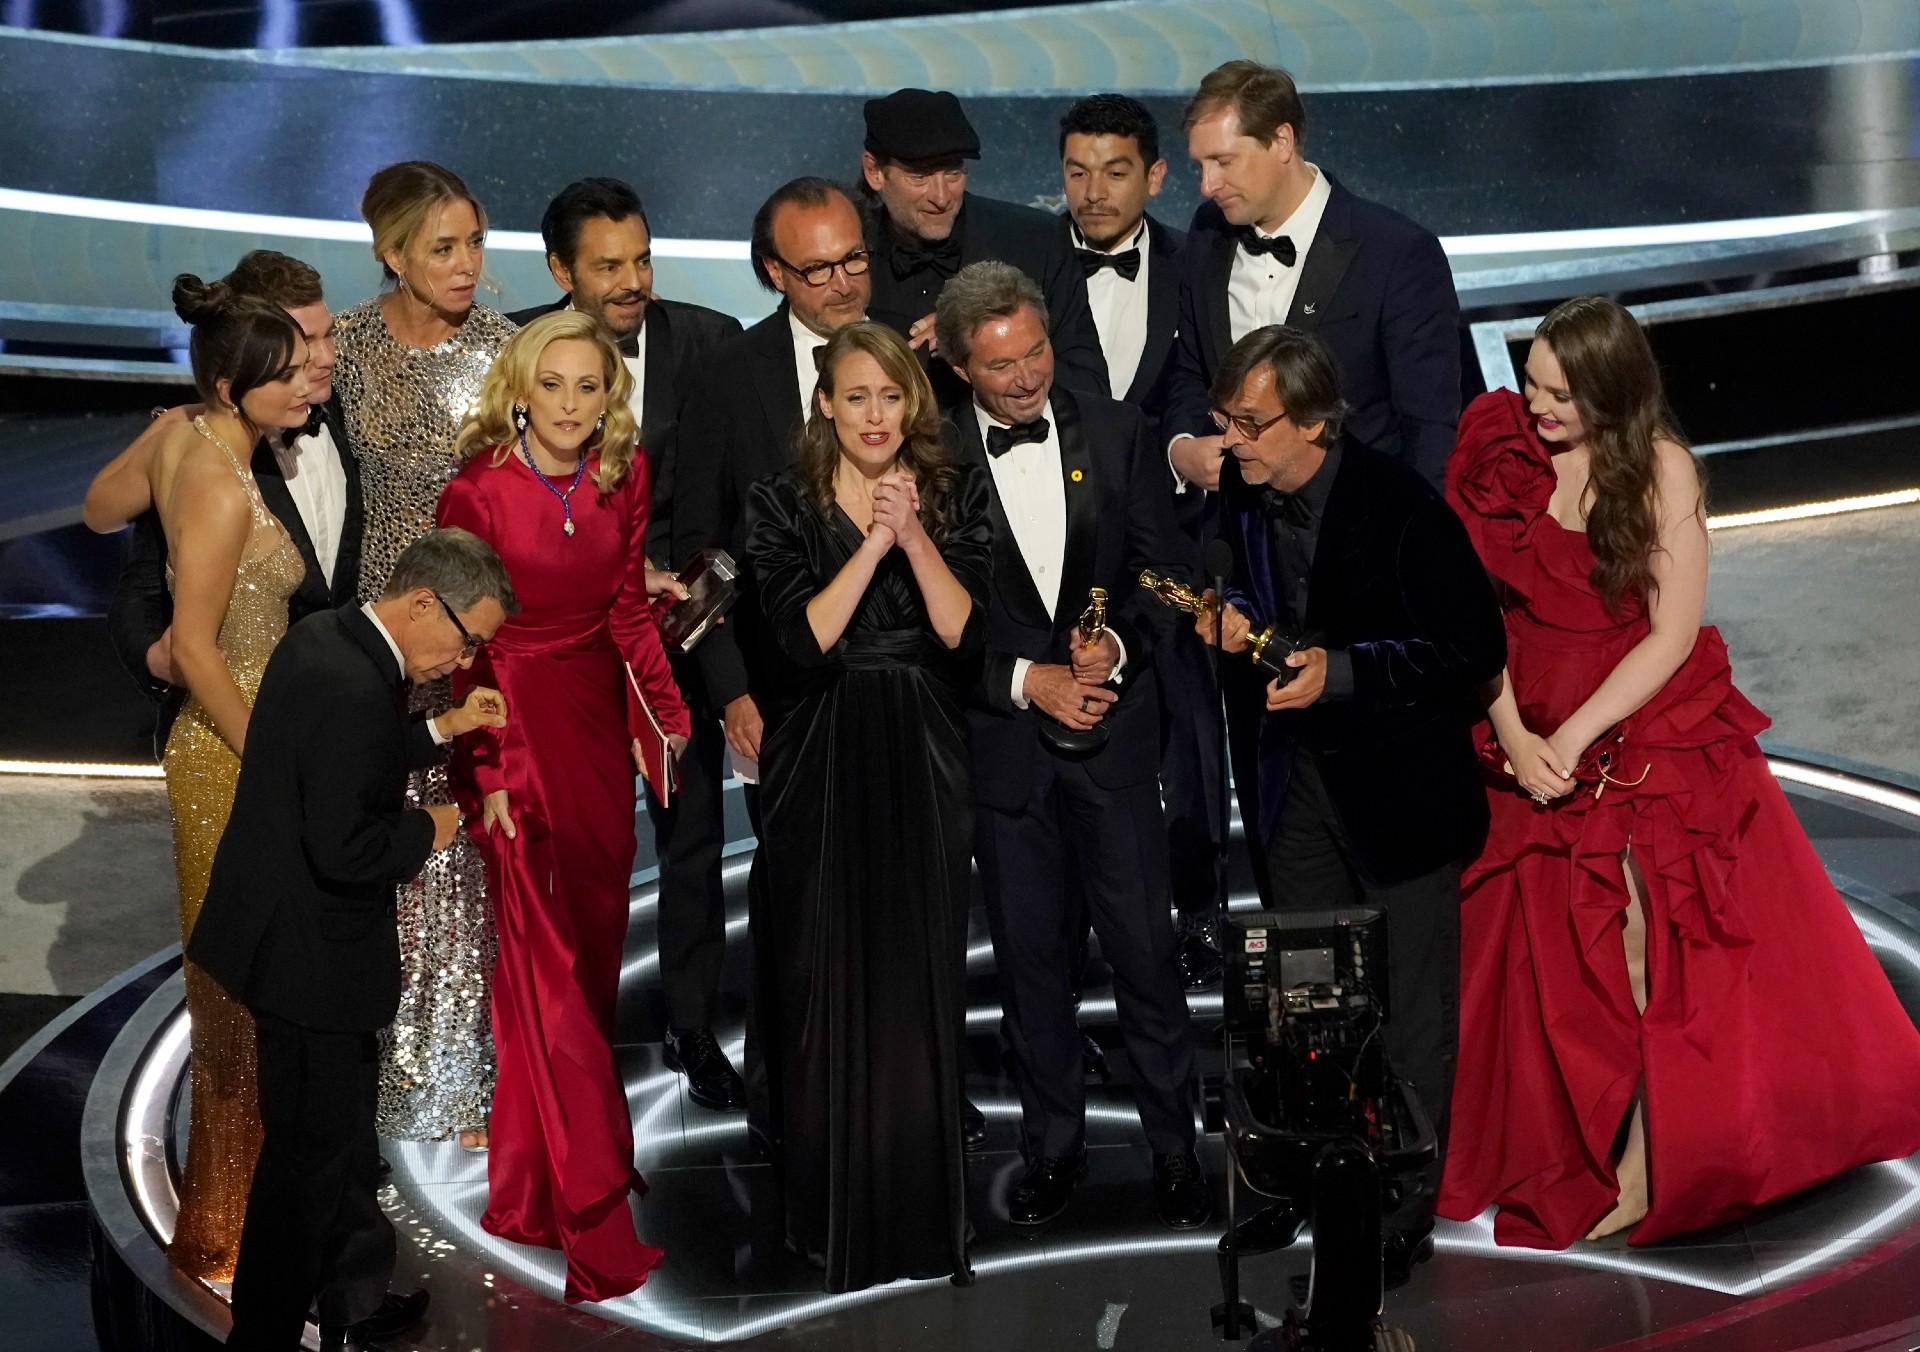 The cast and crew of “CODA” accept the award for best picture at the Oscars on Sunday, March 27, 2022, at the Dolby Theatre in Los Angeles. (AP Photo / Chris Pizzello)